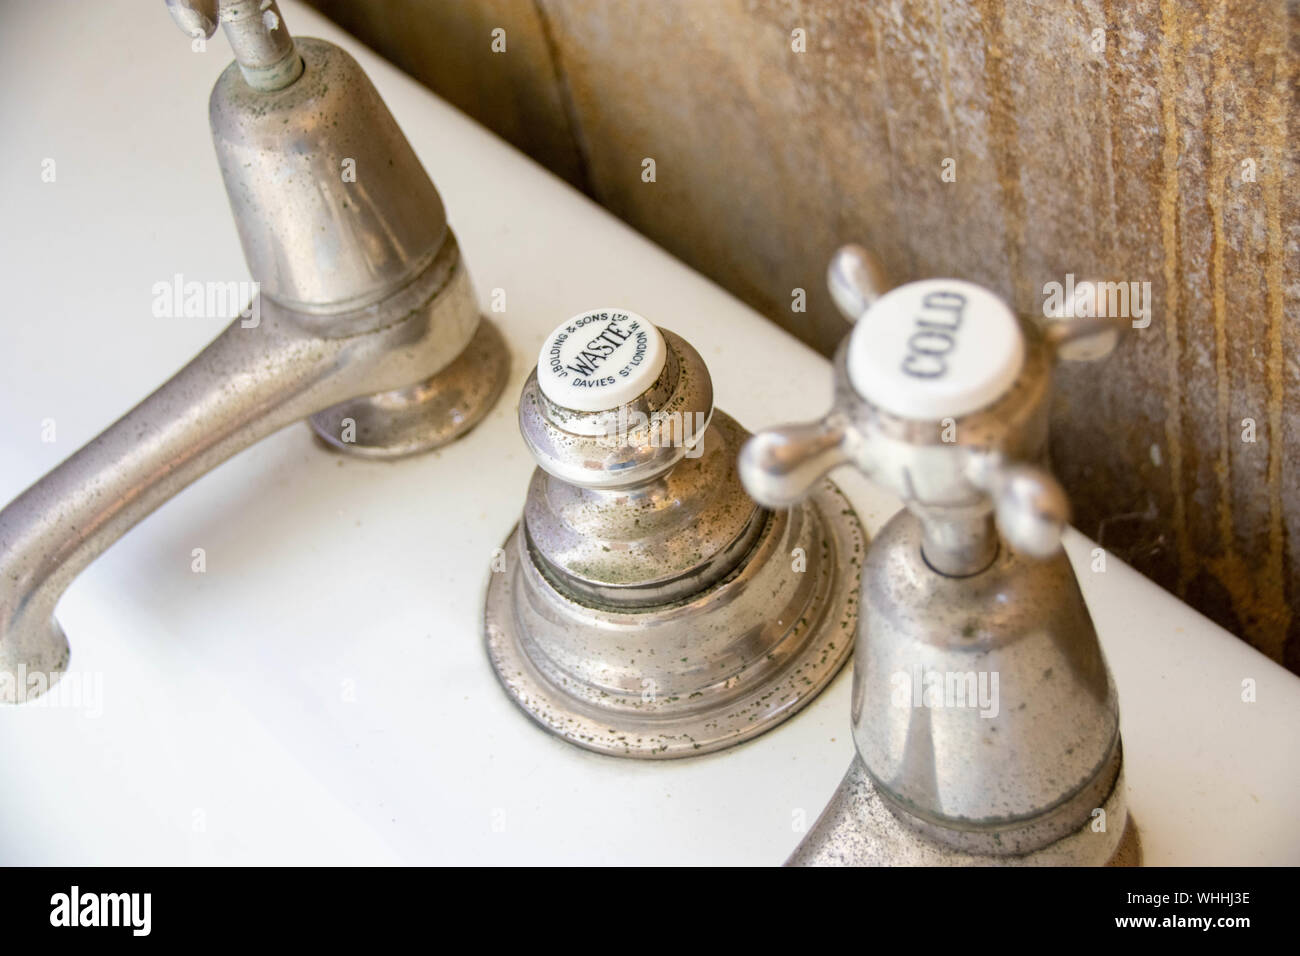 Classic style, antique bathroom taps and waste fixtures and fittings from the early 20th century showing beautiful ageing and patina. Stock Photo